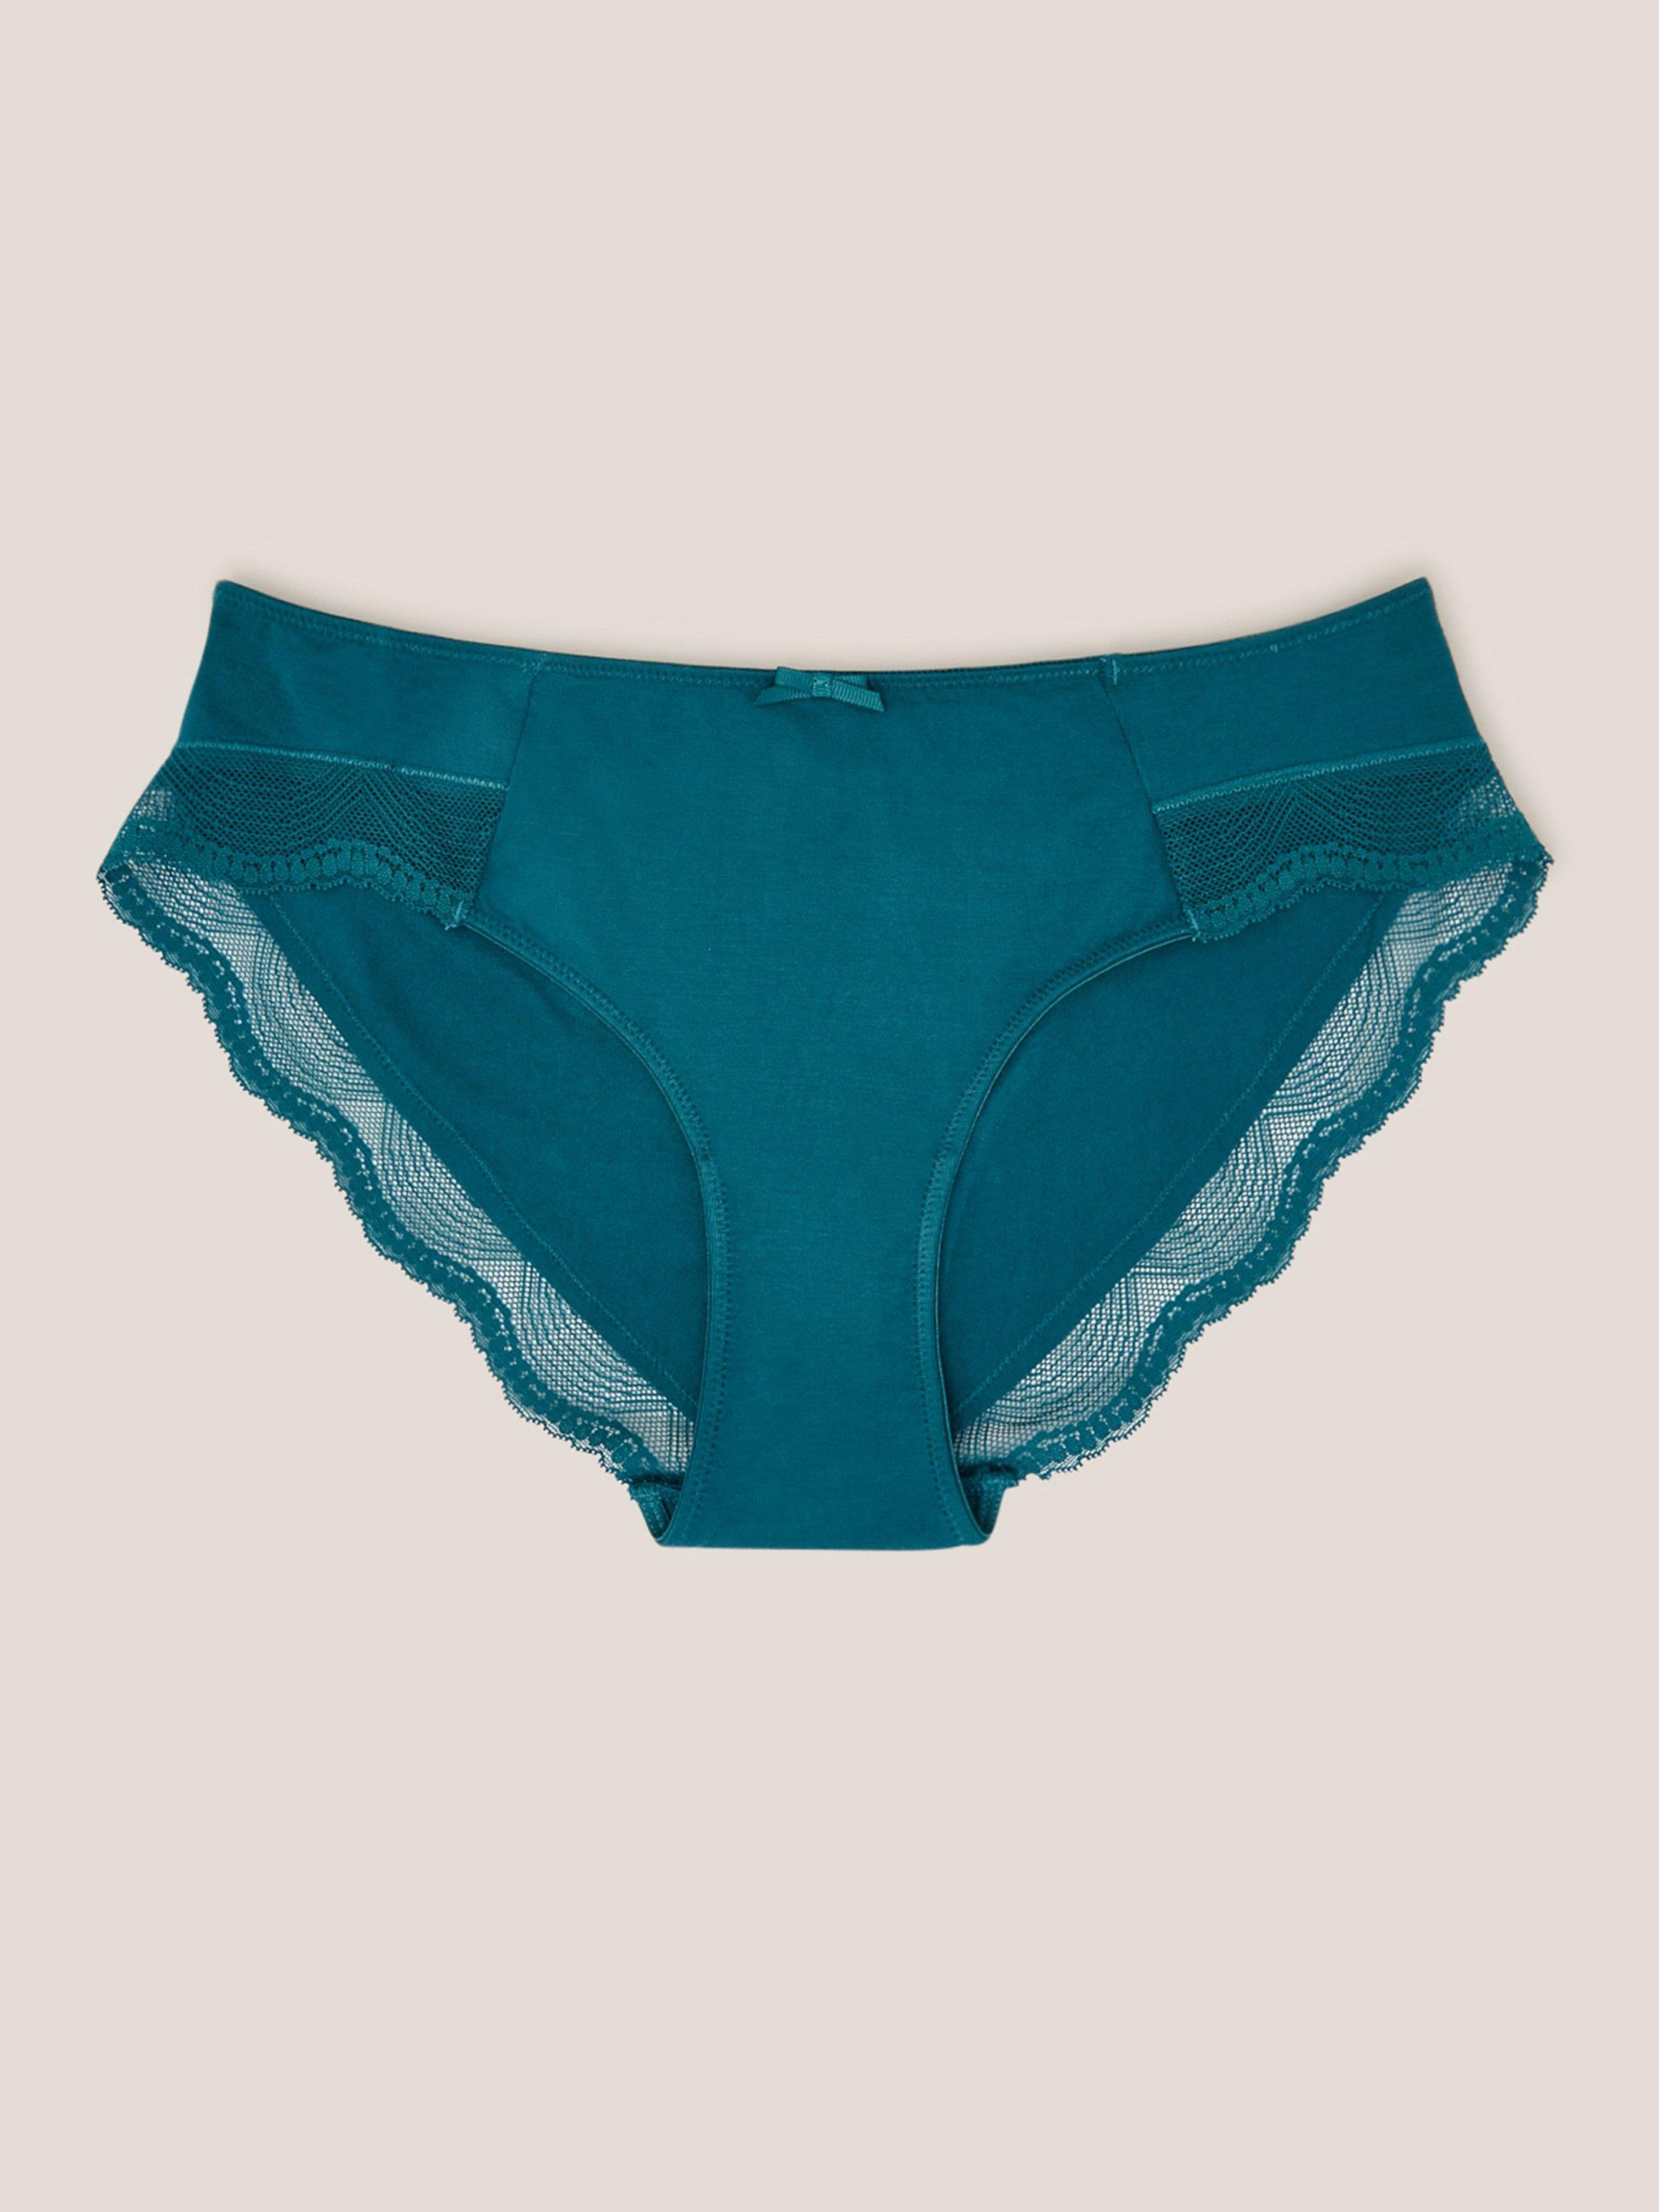 Shortie in MID TEAL - FLAT FRONT